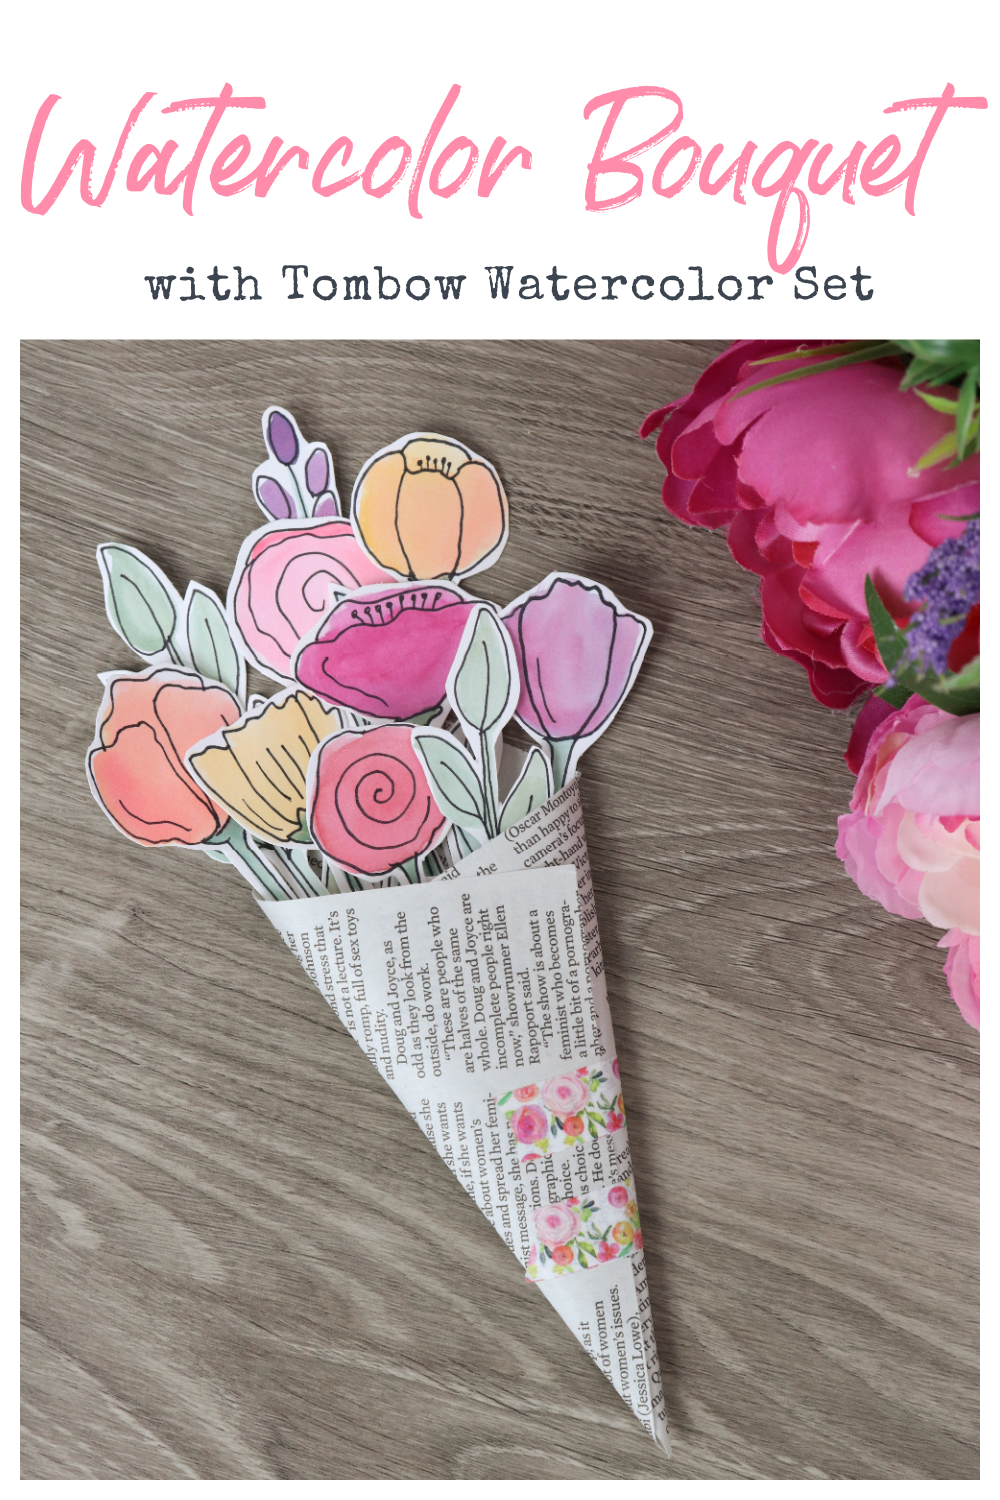 Image contains a floral bouquet made of hand-drawn watercolored flowers wrapped in a square of newspaper. This image also contains the project title and is intended for Pinterest.